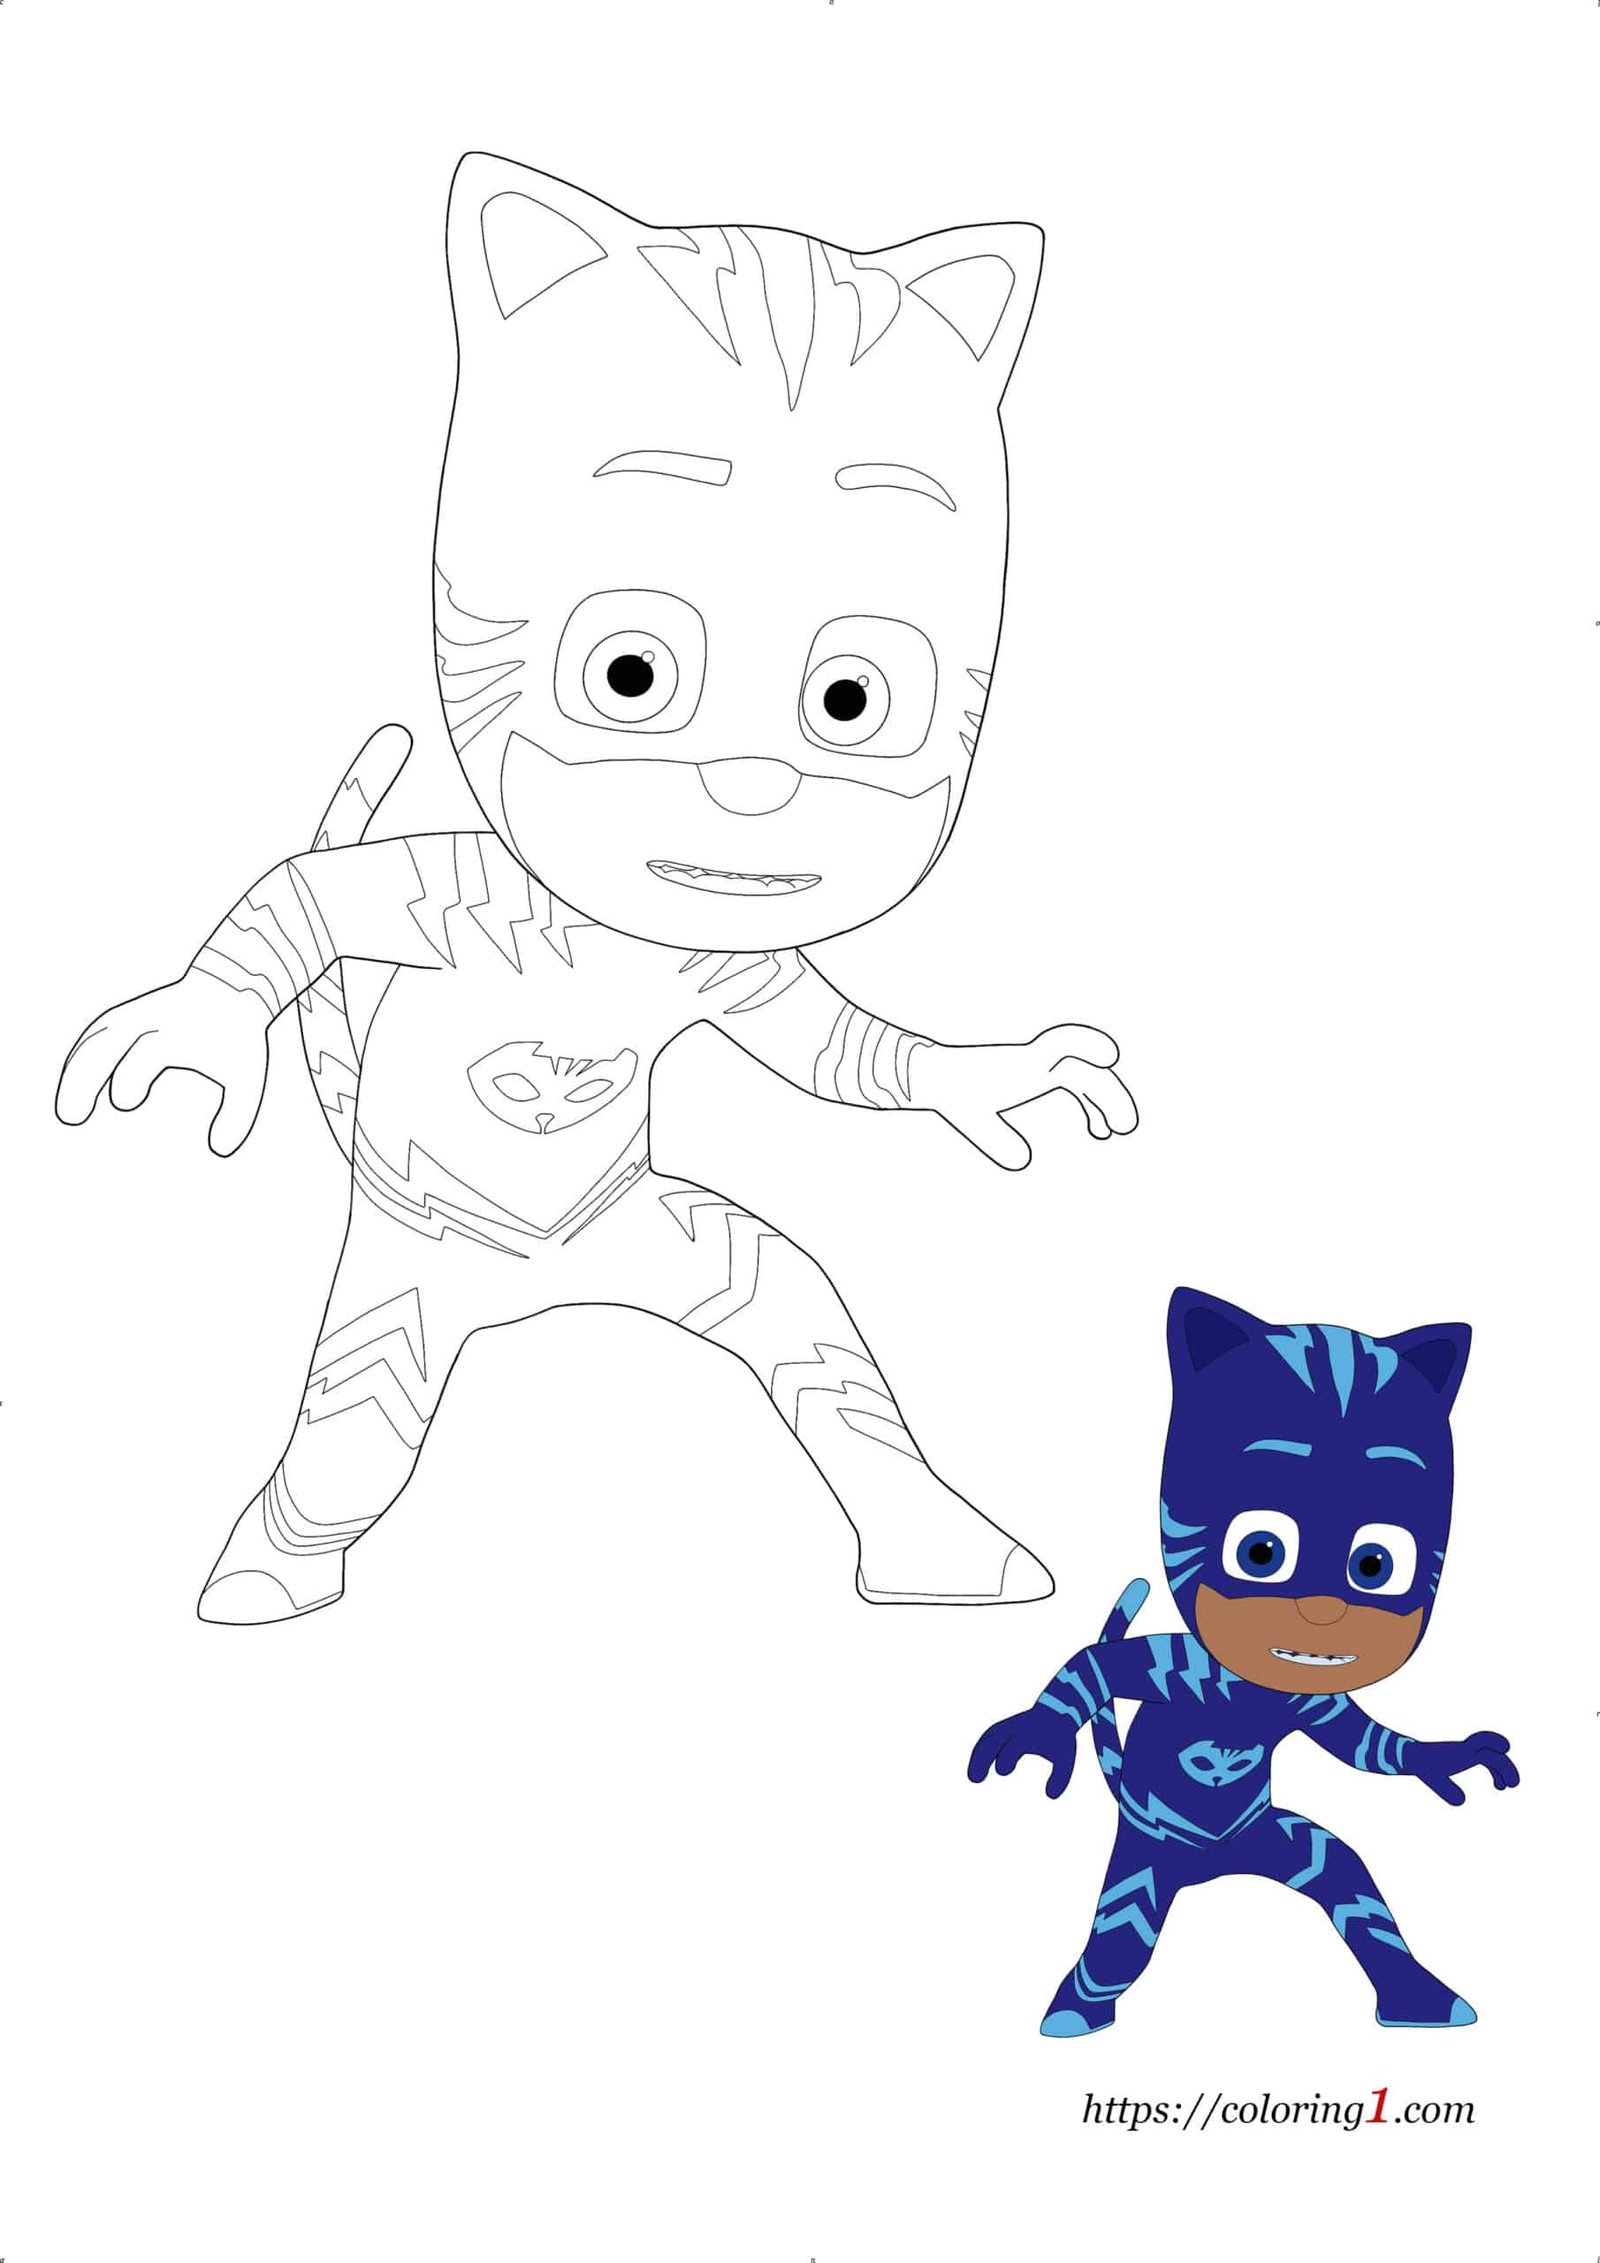 Pj Masks Catboy free coloring page to print